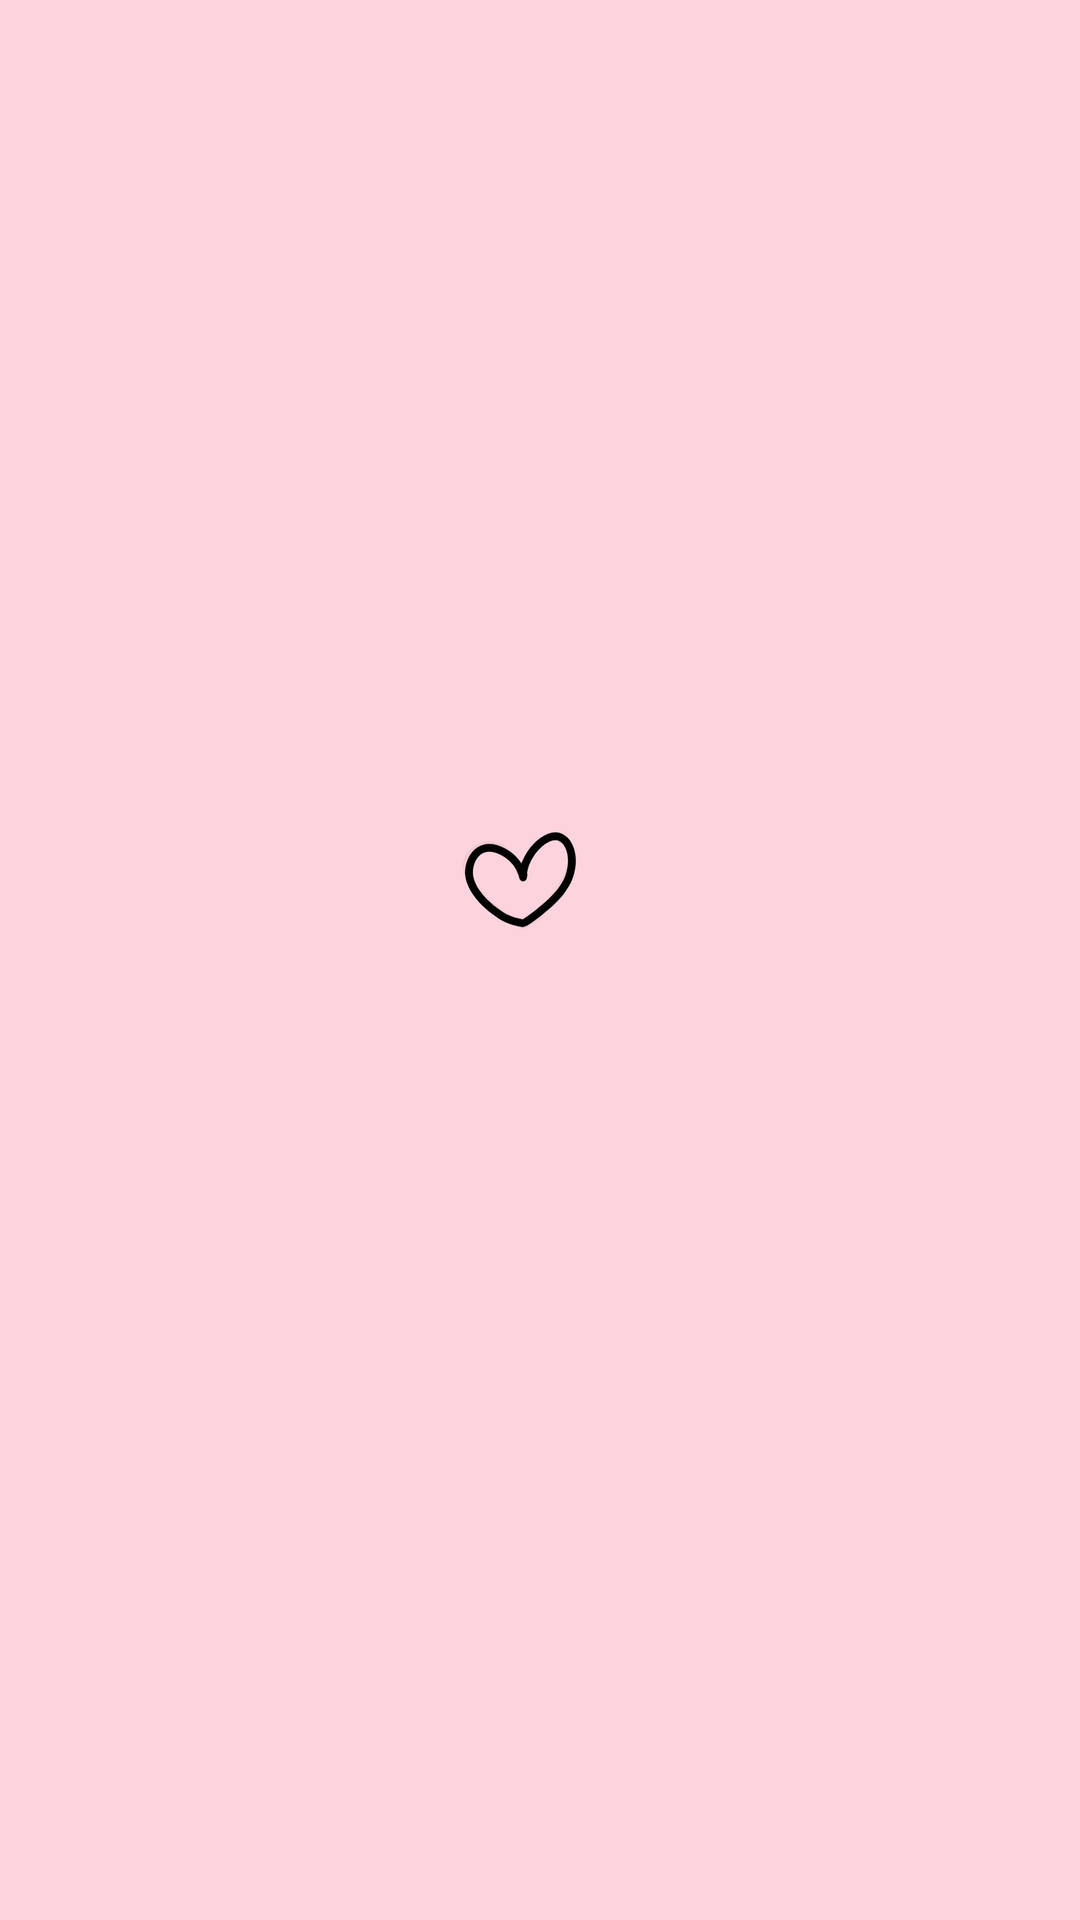 Cute Pink Aesthetic Heart Background